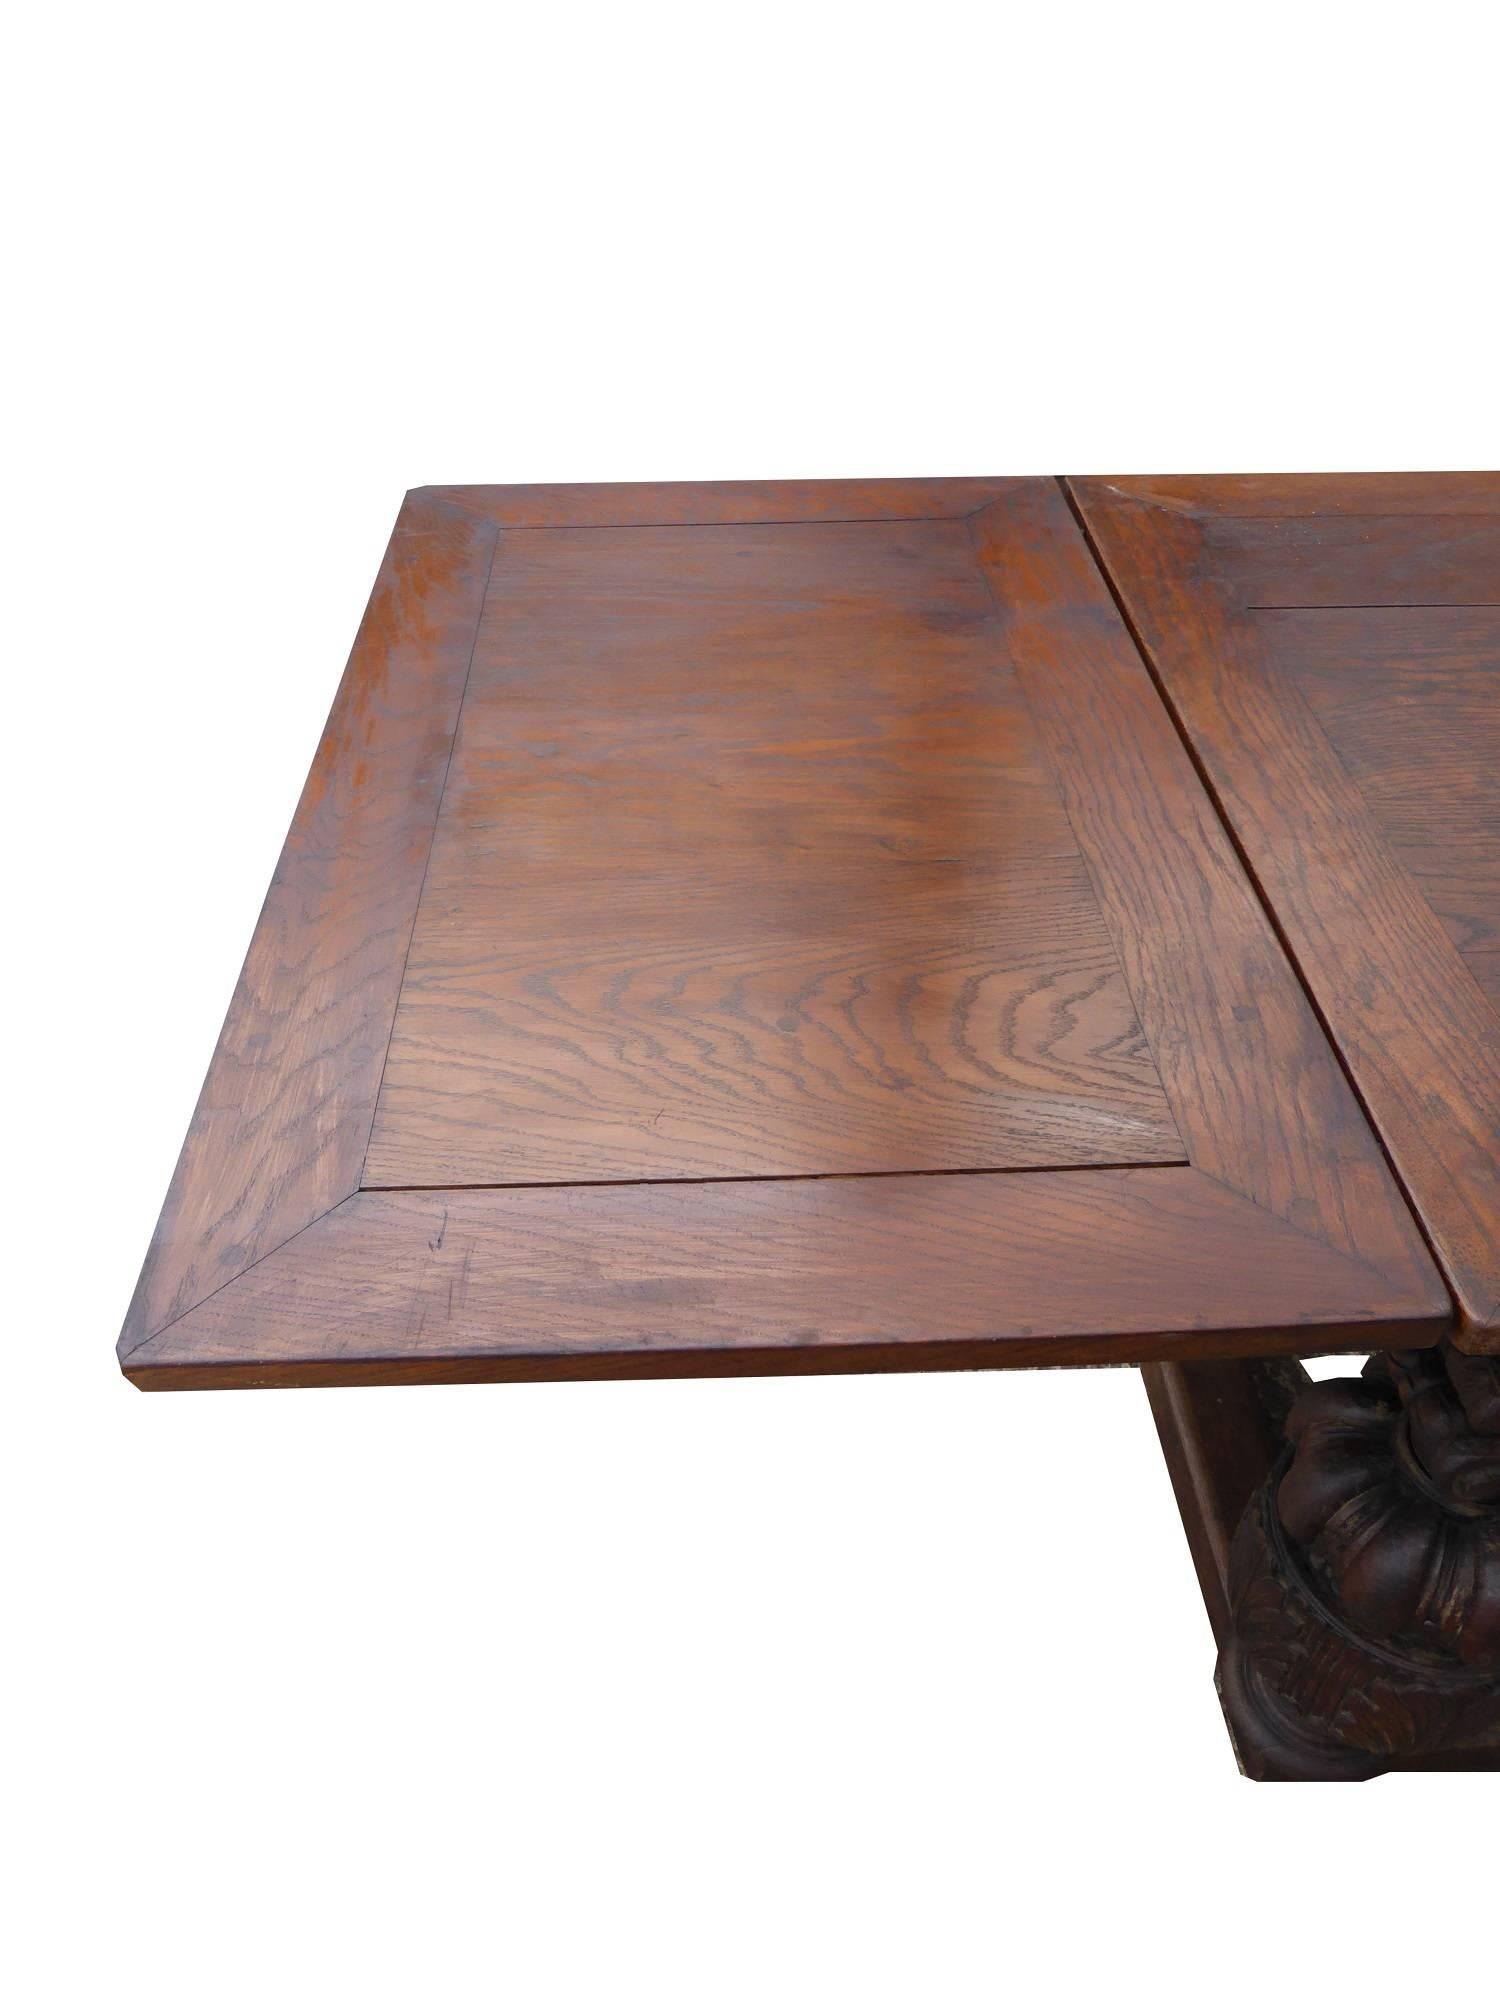 Large 19th Century Refectory Draw Leaf Table 3